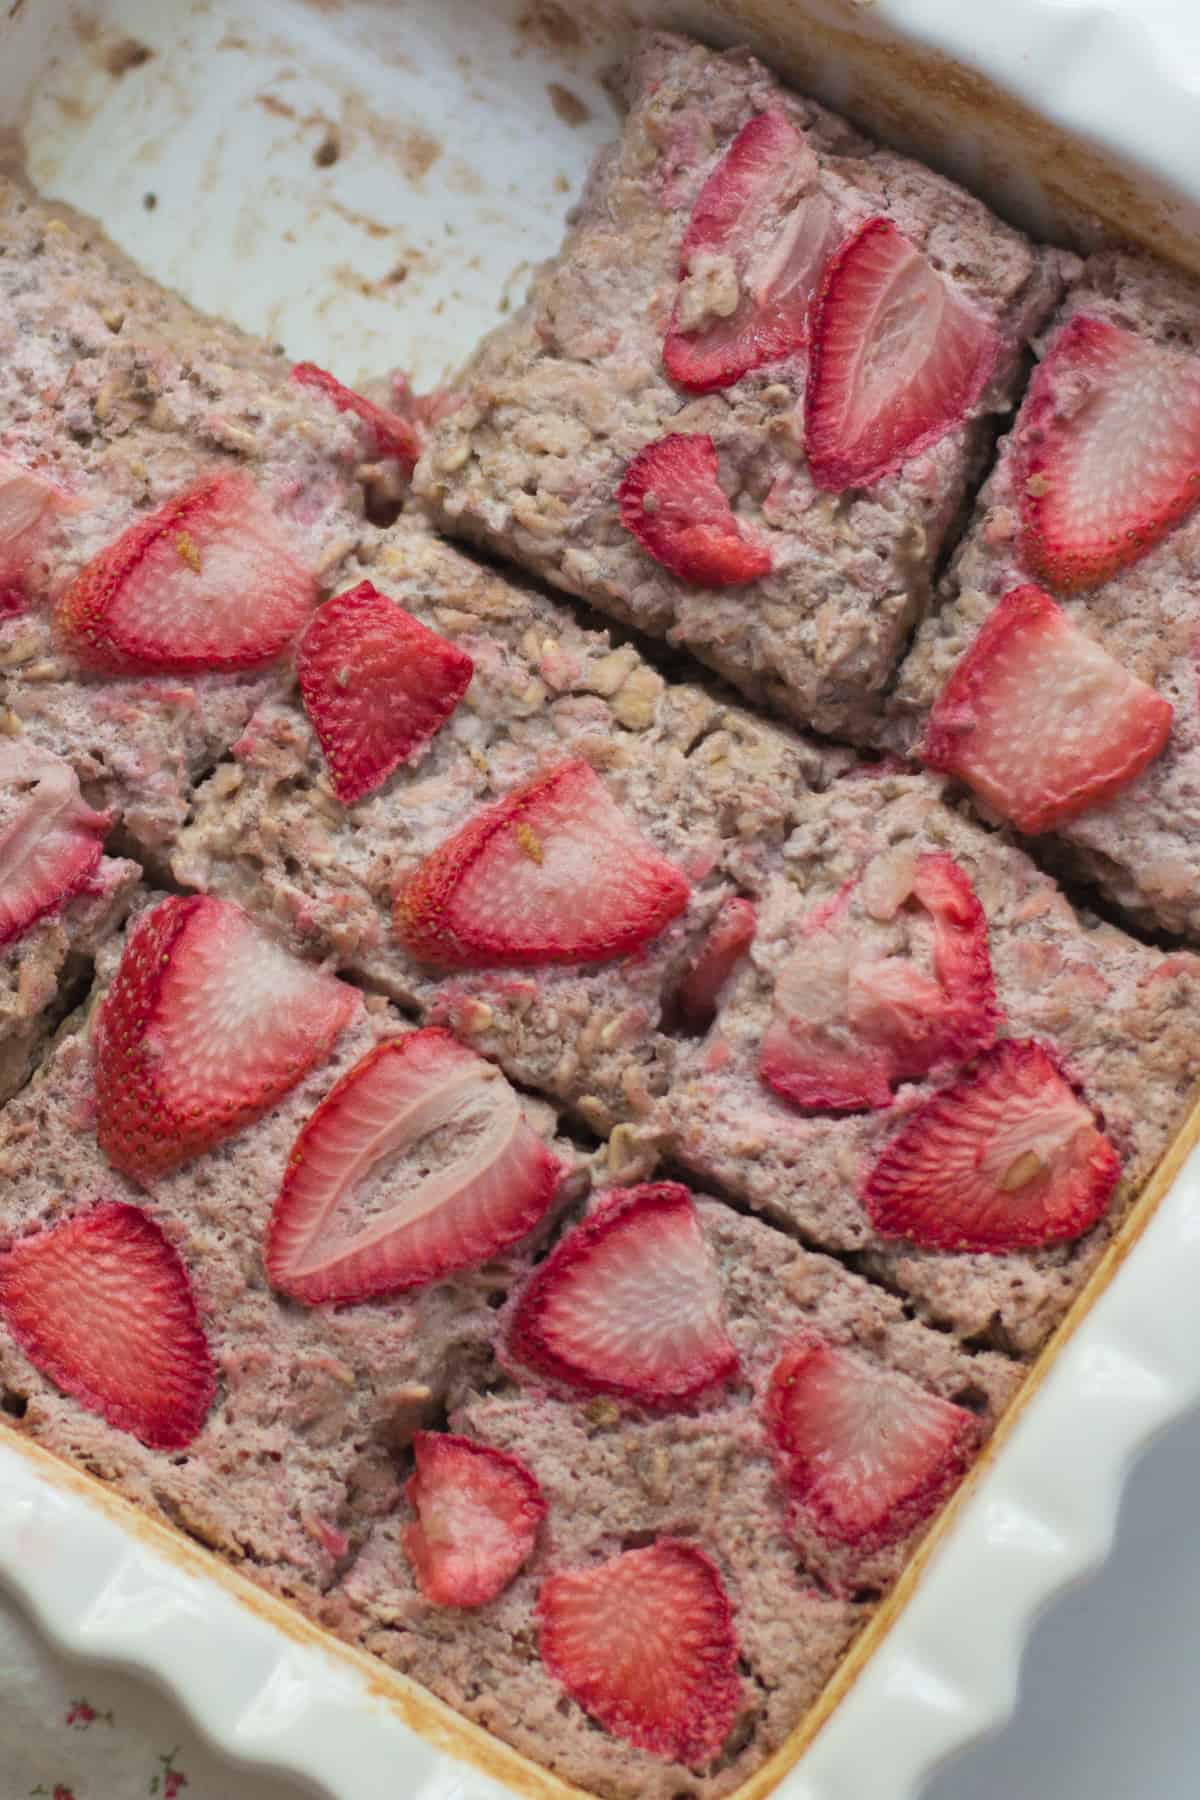 A close up shot of baked strawberry oatmeal in a pan.